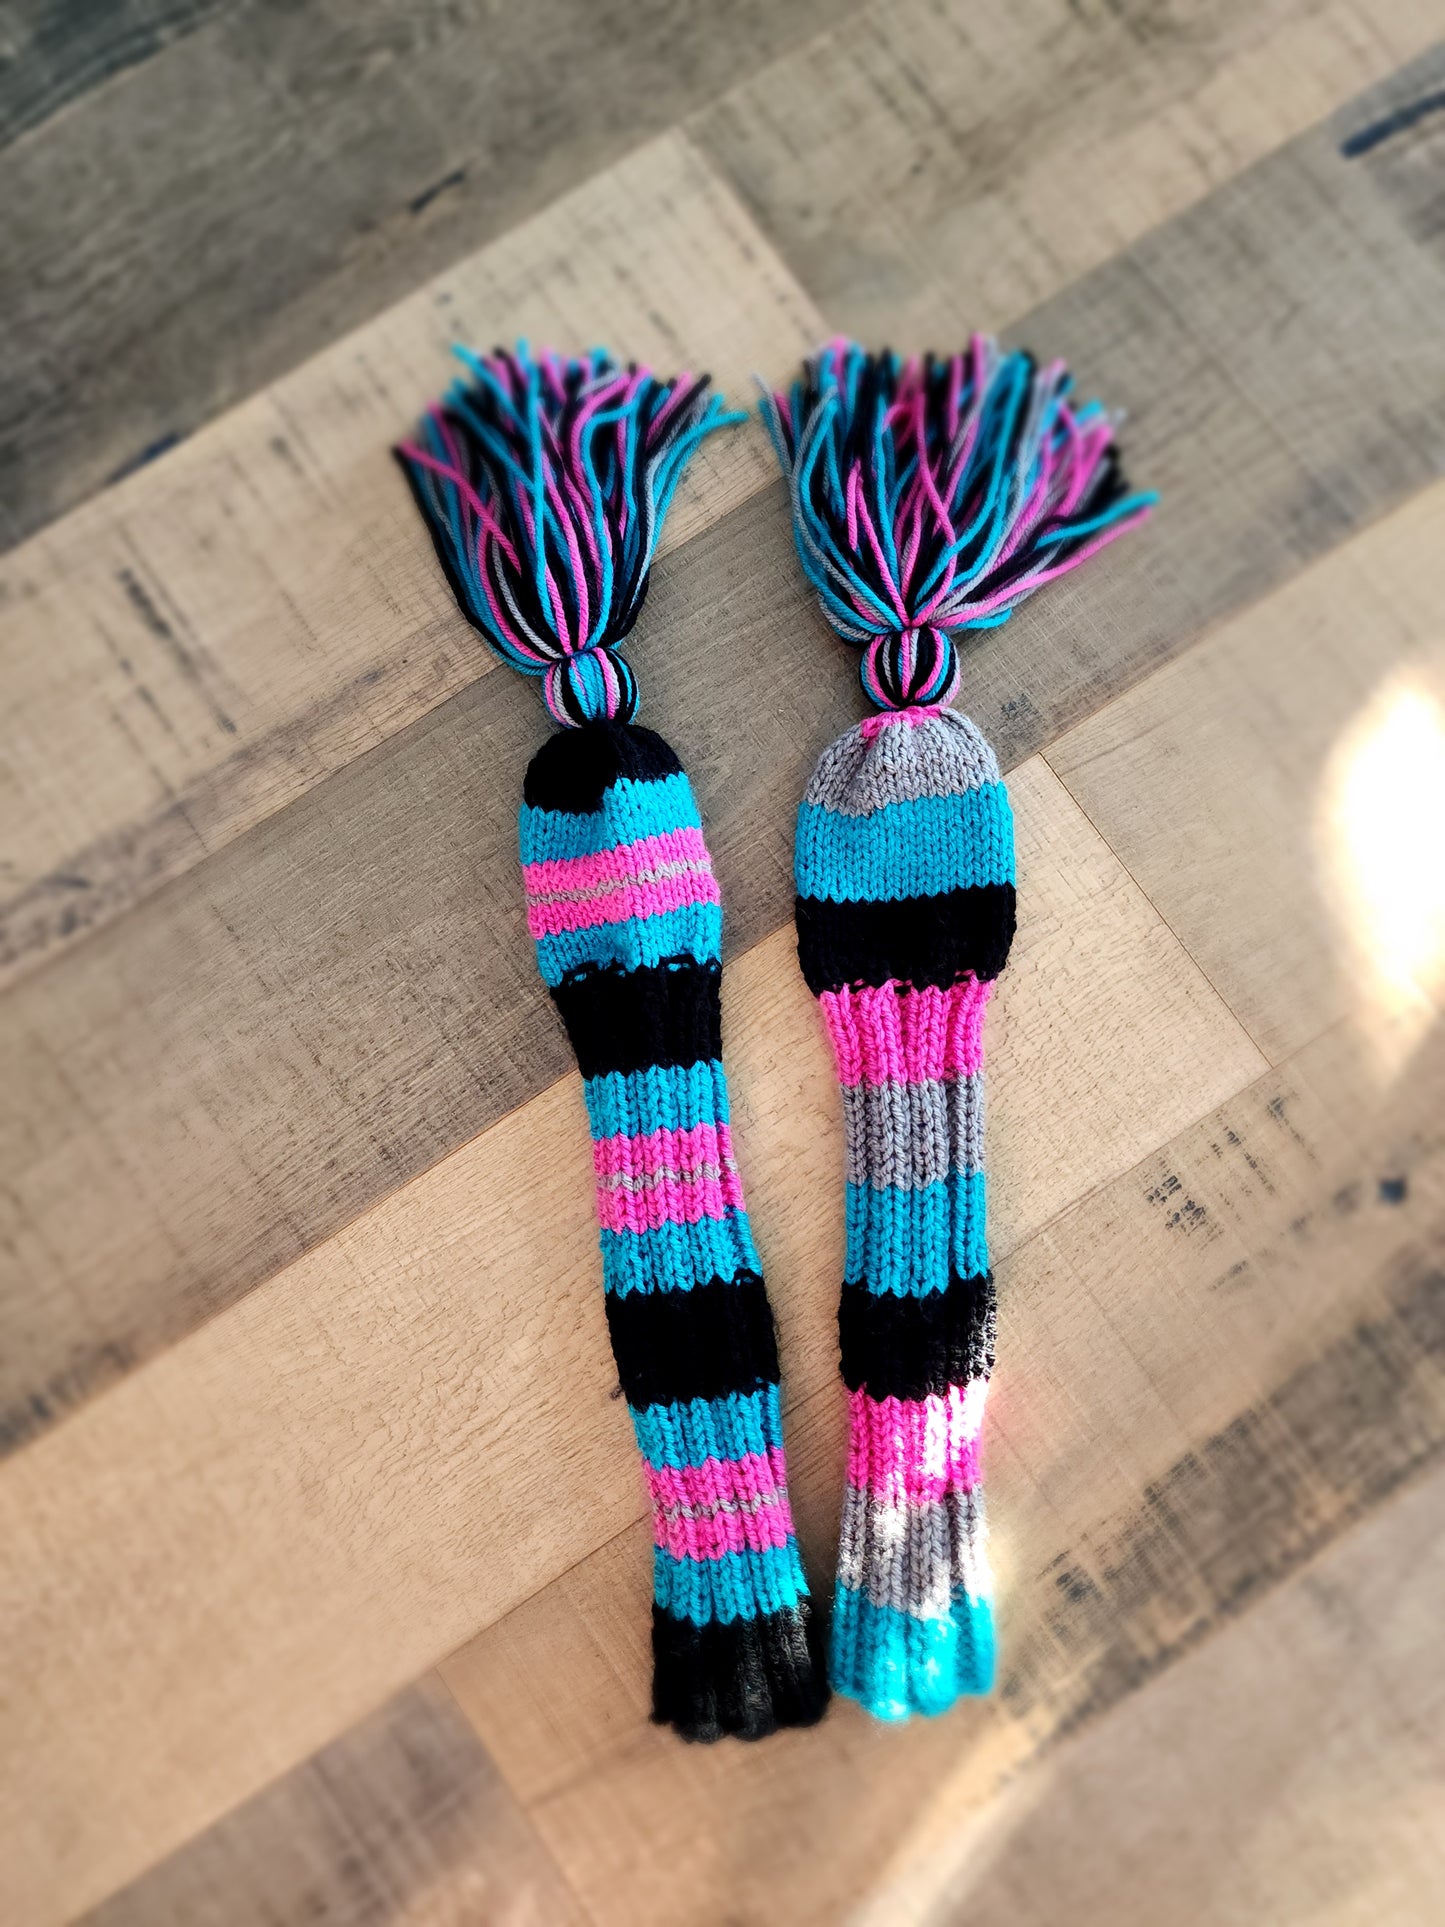 Two Hand Knit Golf Club Head Covers Retro-Vintage Black, Teal, Pink &Gray with Tassels for Fairway Woods - Austinknittylimits